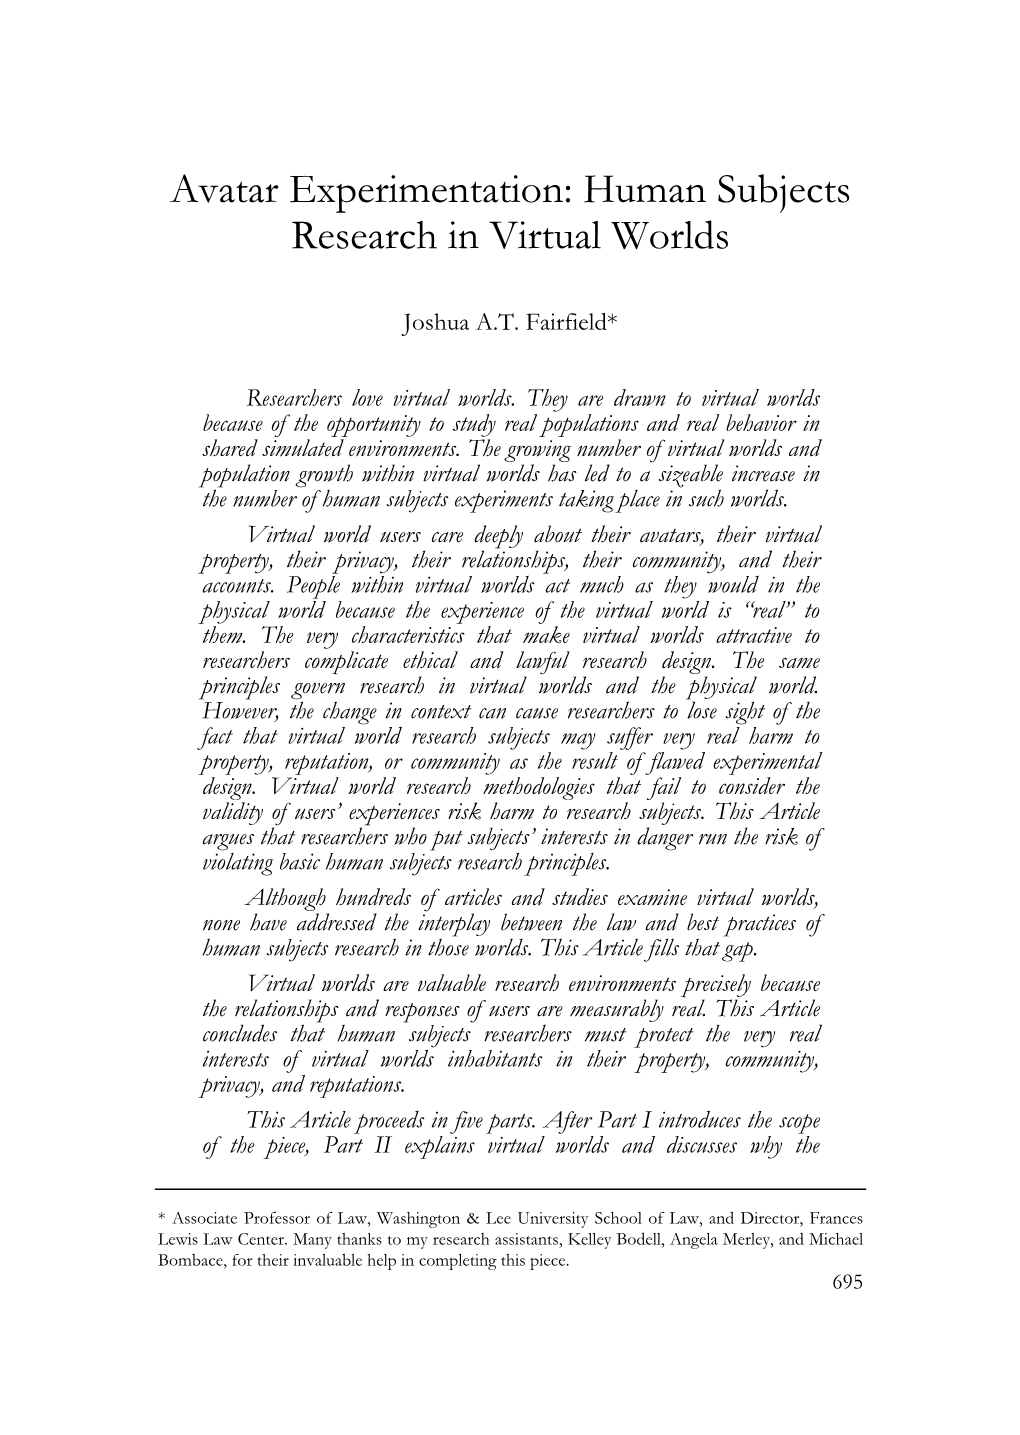 Avatar Experimentation: Human Subjects Research in Virtual Worlds